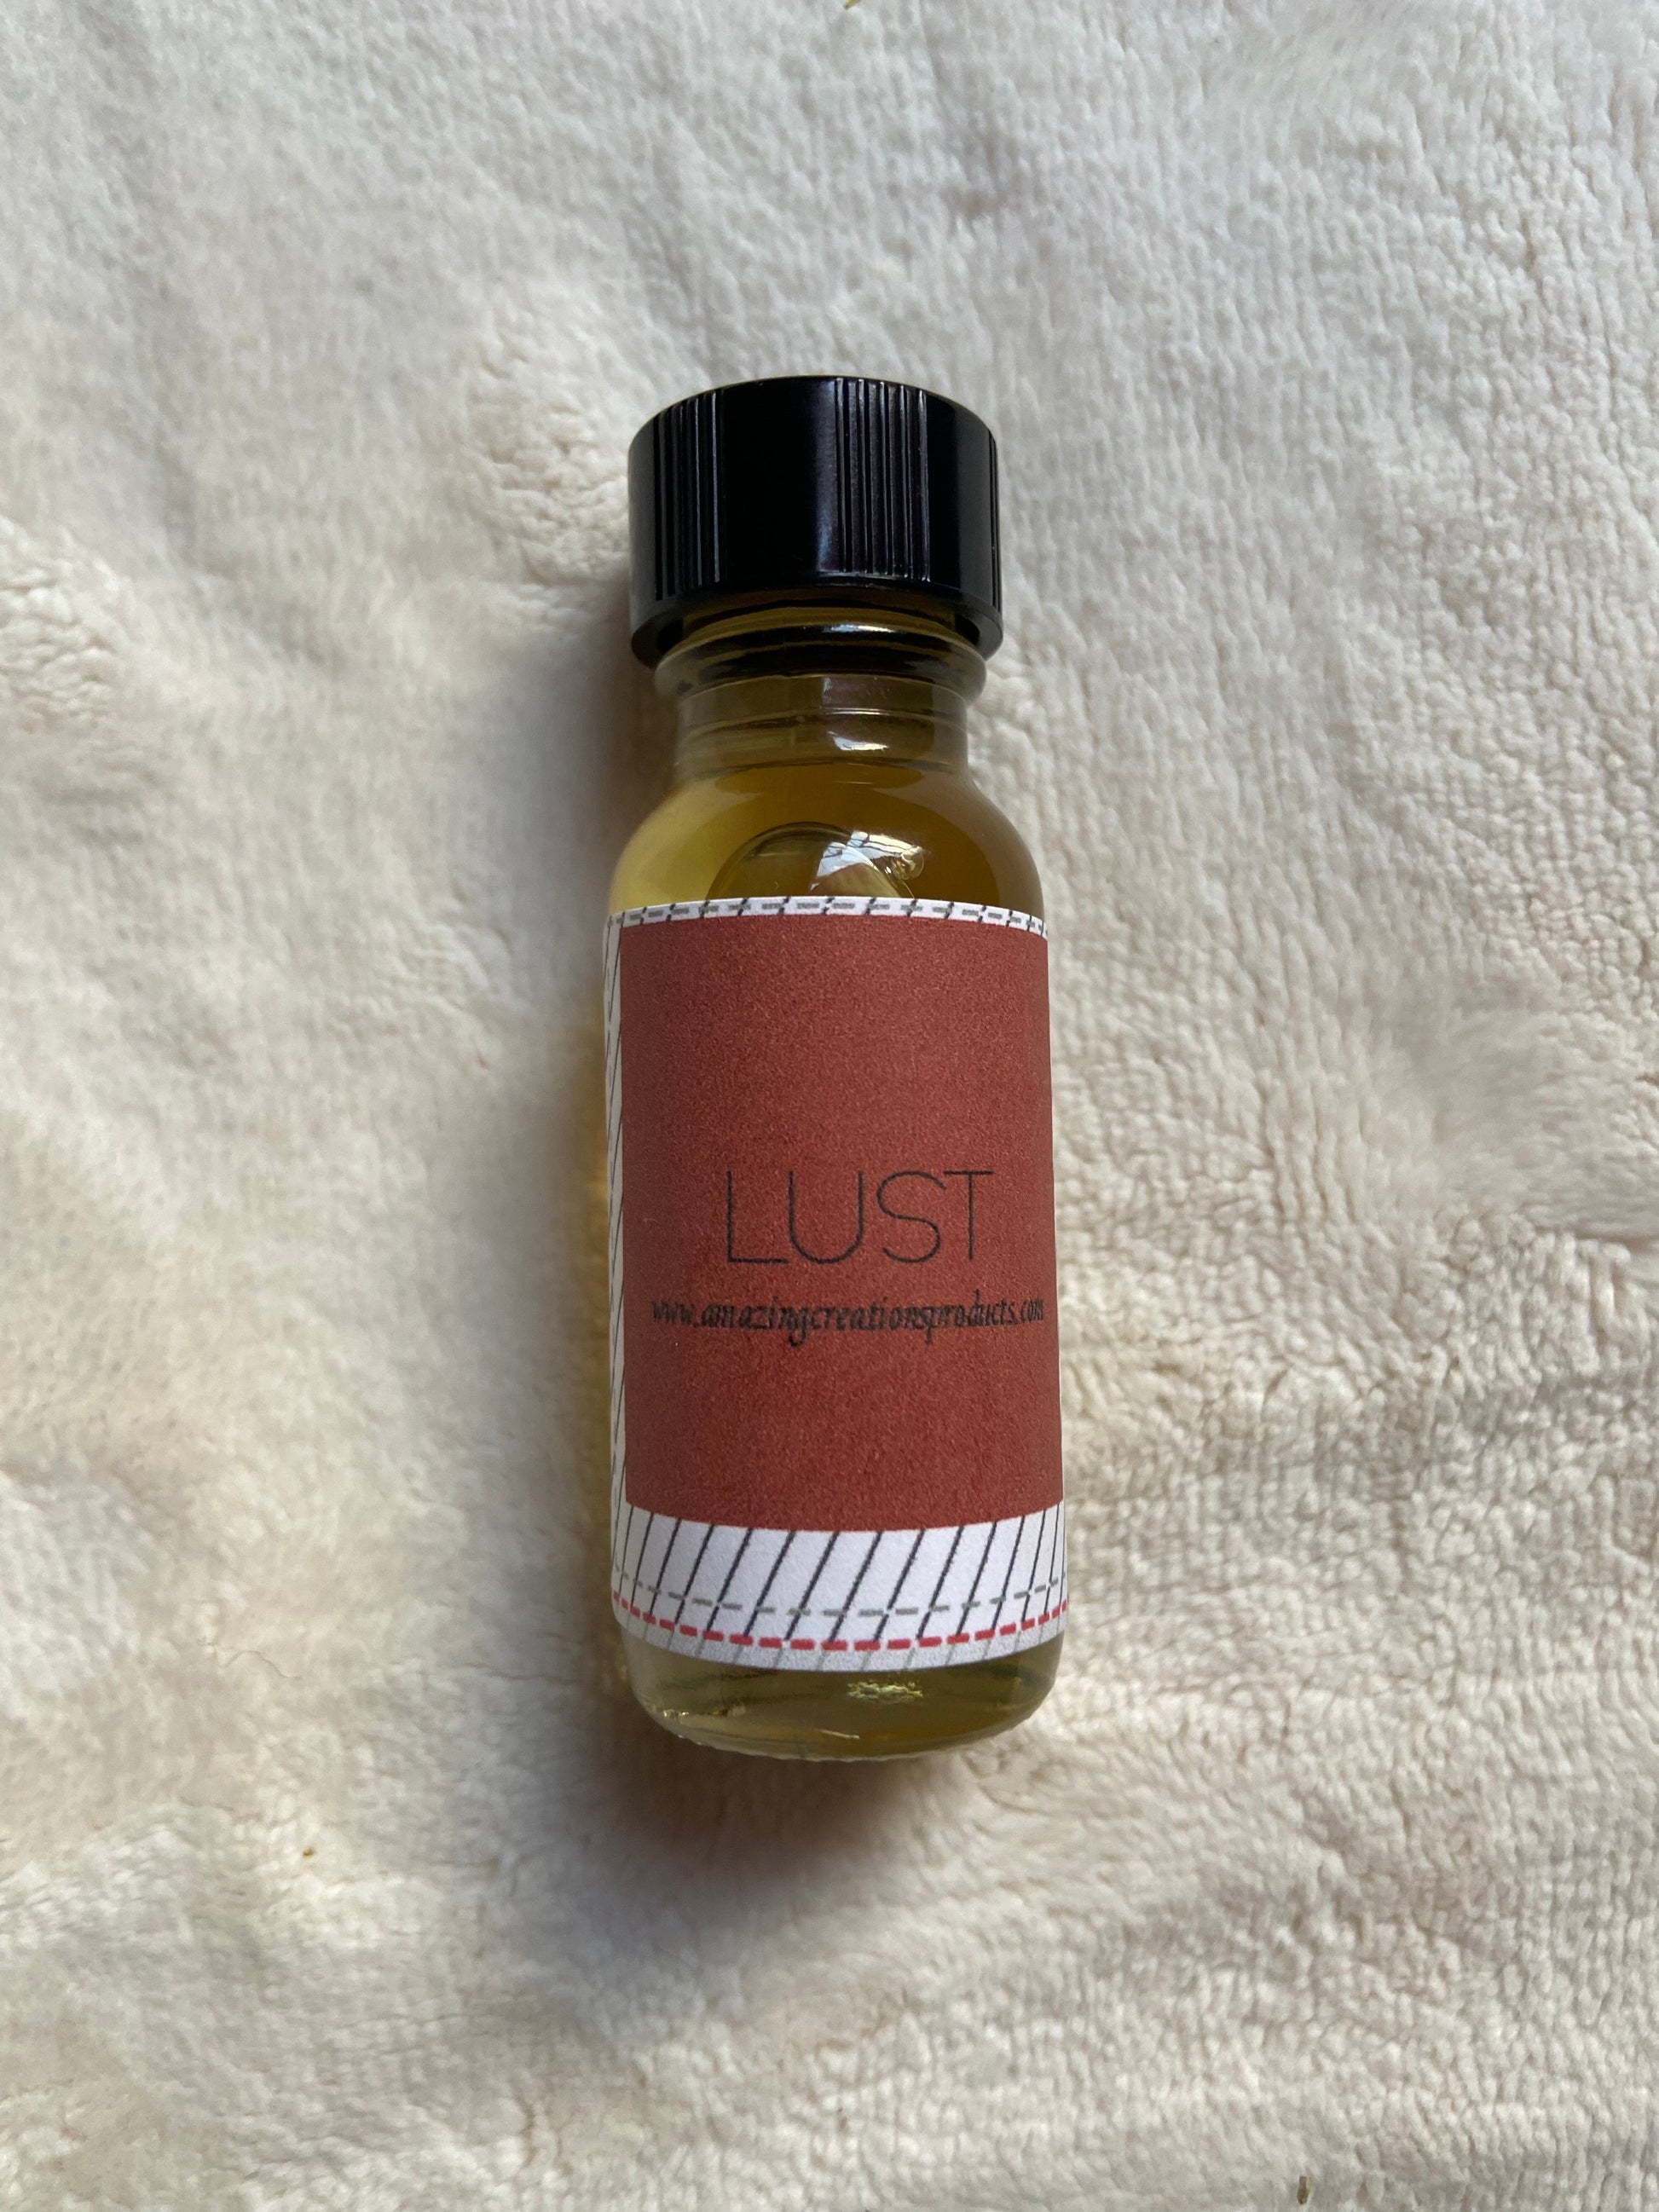  Lust - Oil available at Amazing Creations Products . Grab yours for $5 today!